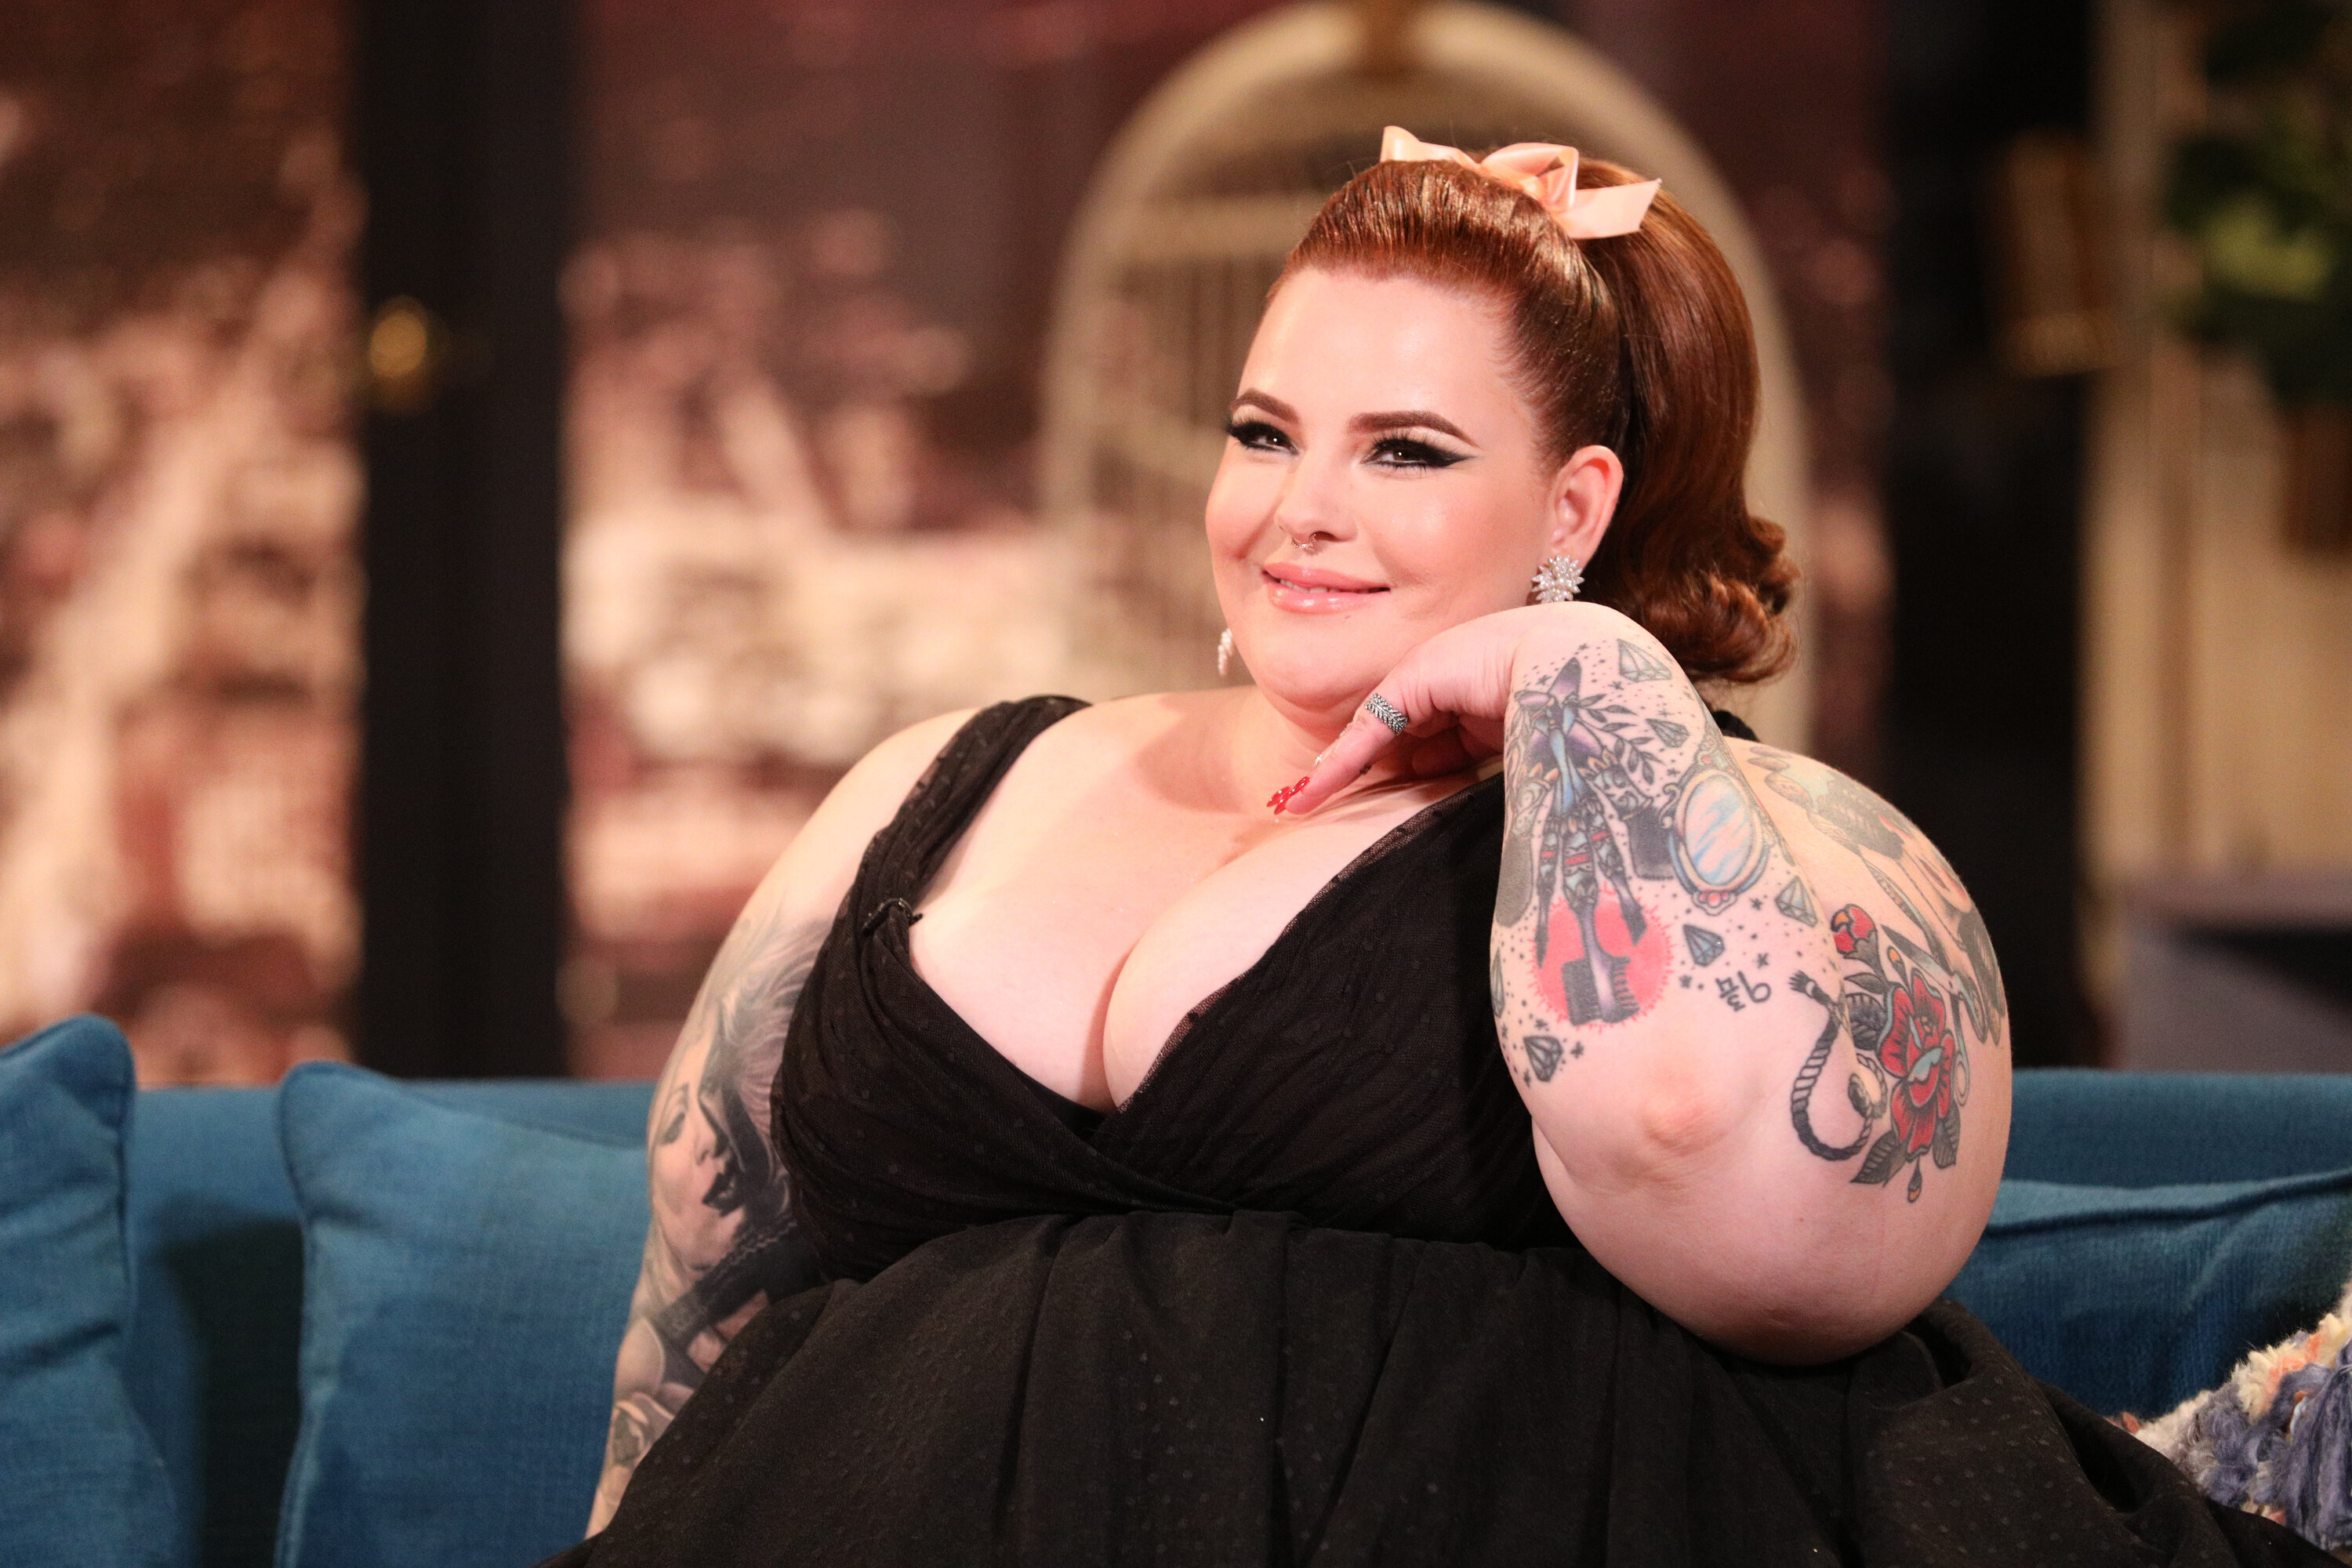 Like Tess Holliday, Im Fat And I Just Want To Live My Damn Life HuffPost HuffPost Personal pic